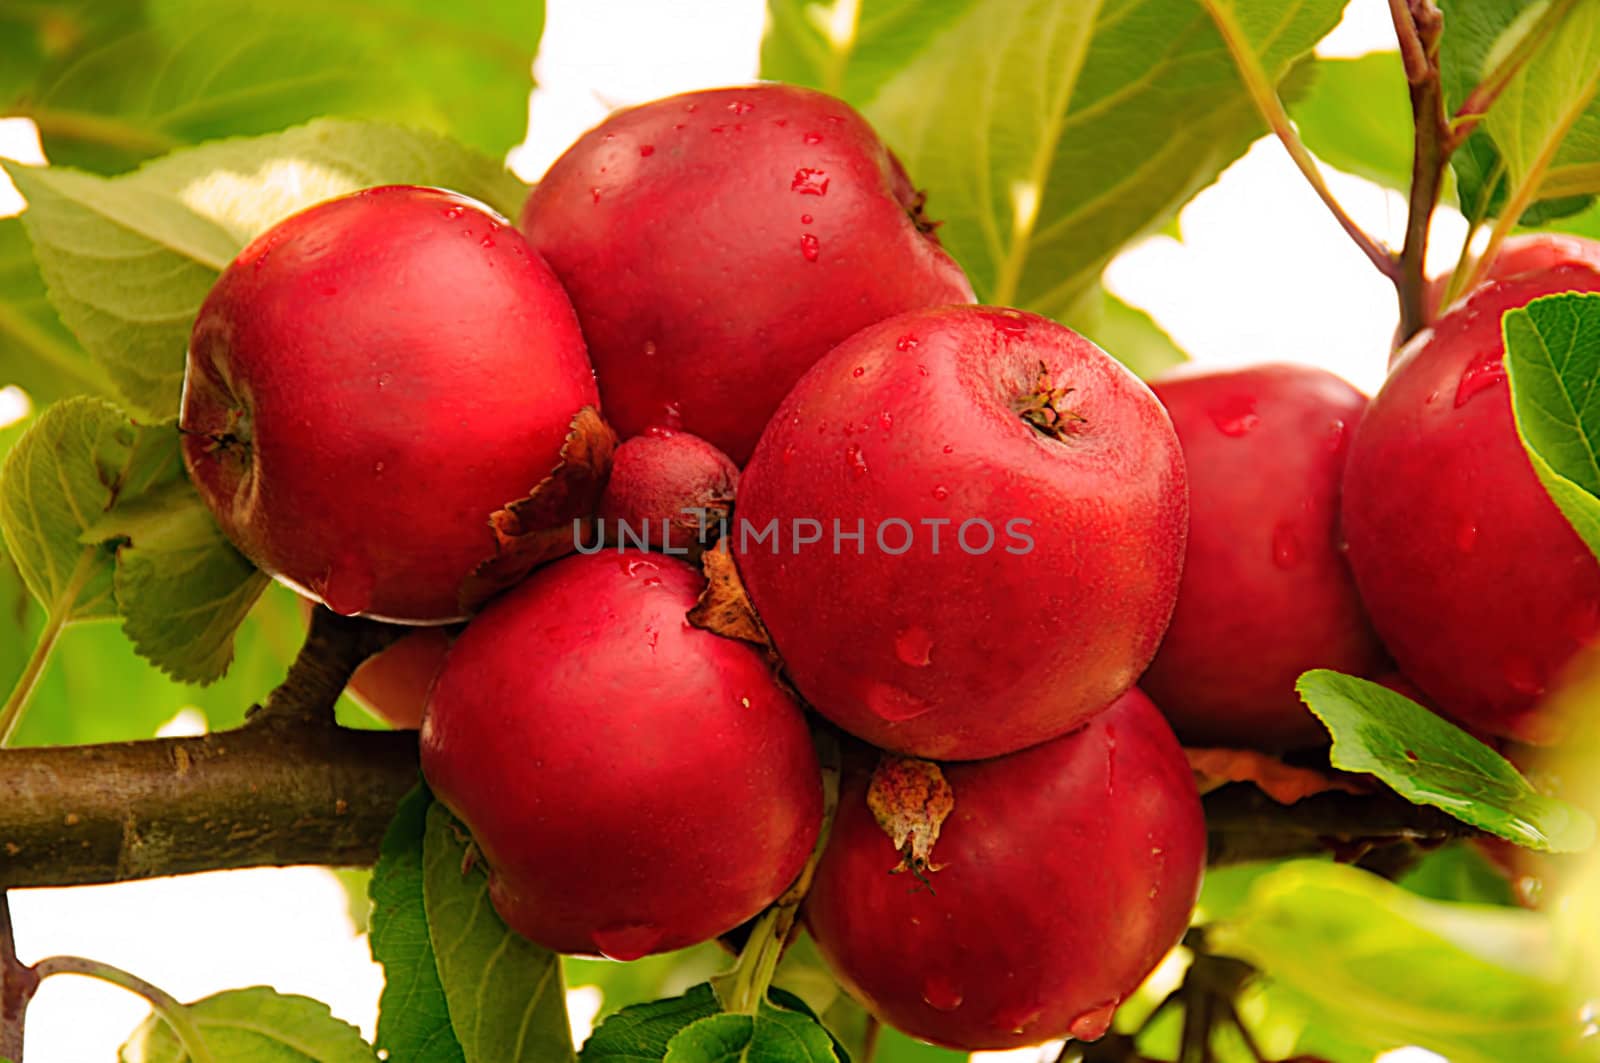 Red apples by GryT